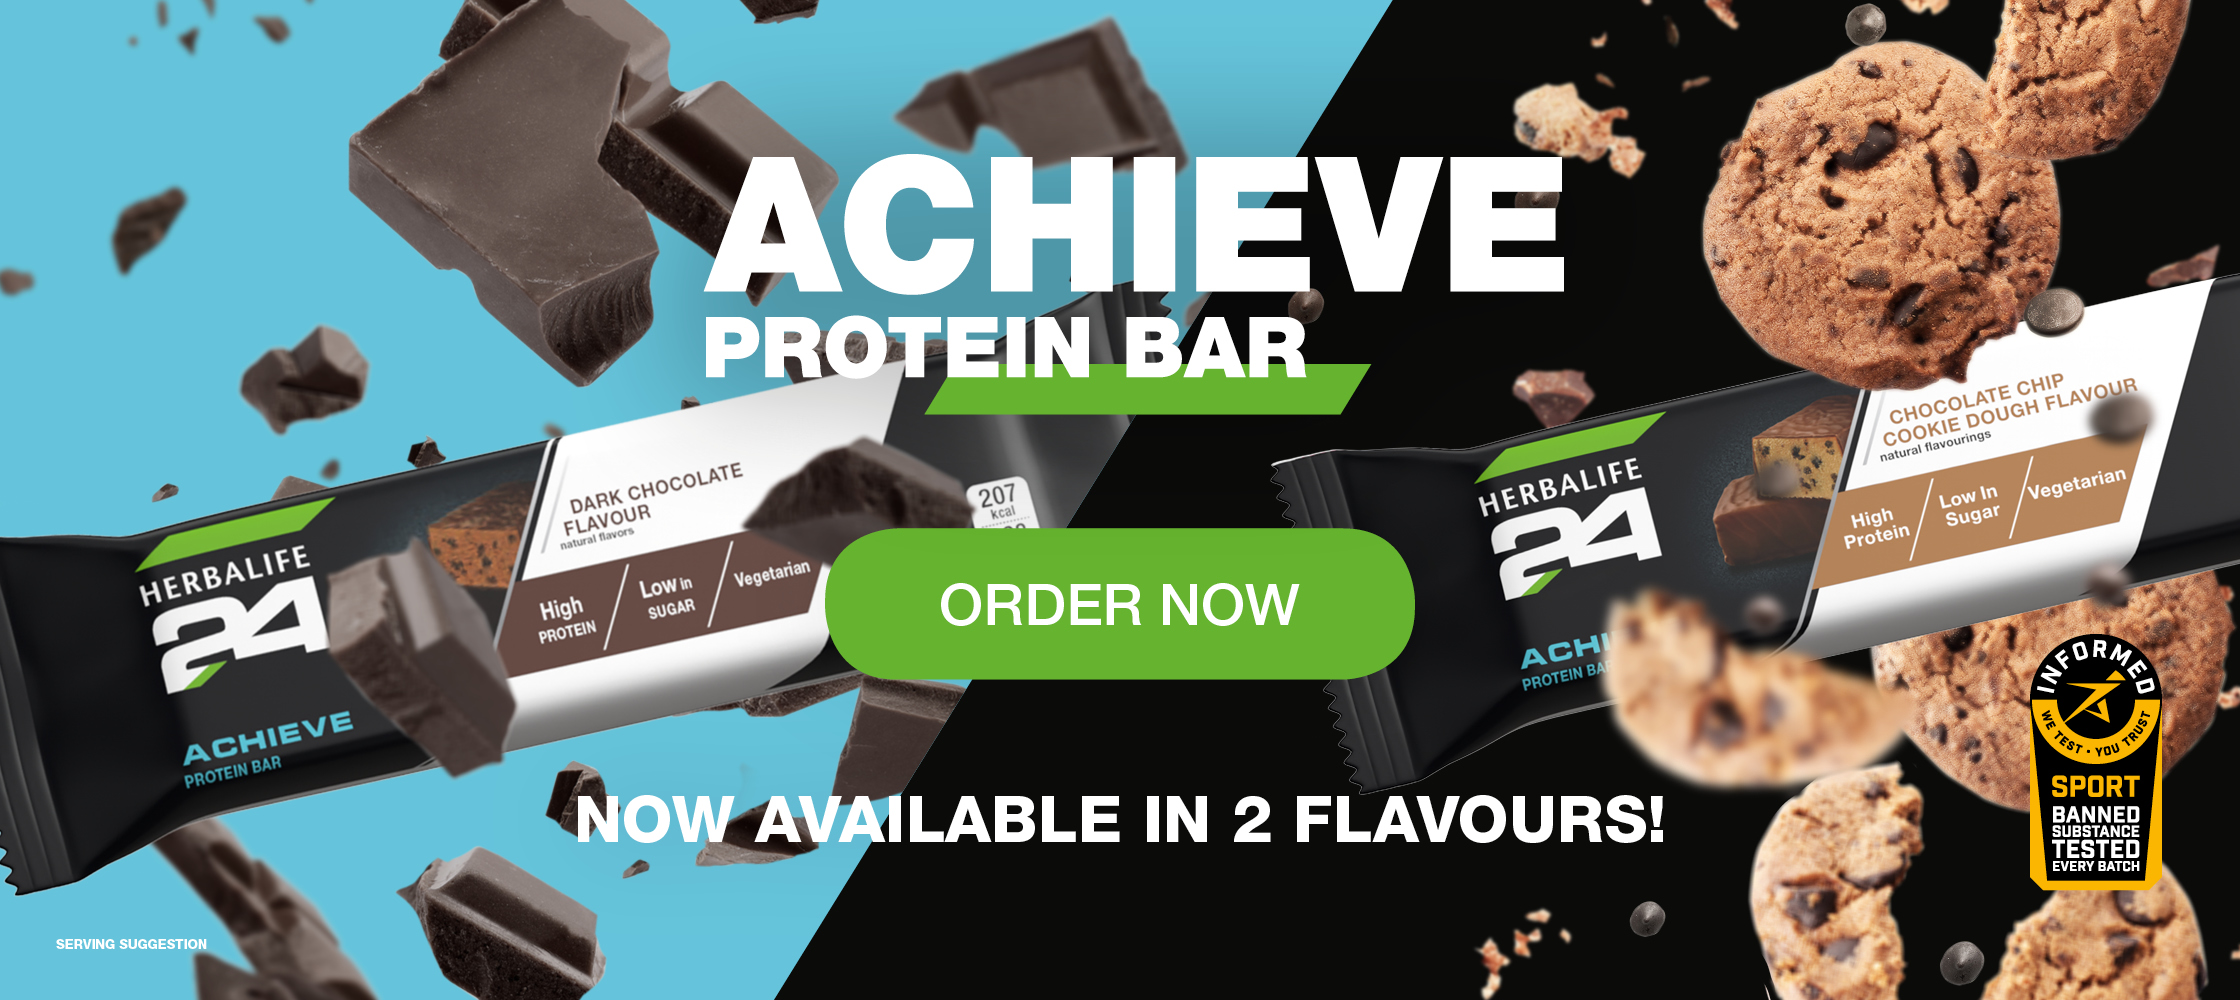 H24 Achieve Bar Chocolate Chip Cookie Dough product shot